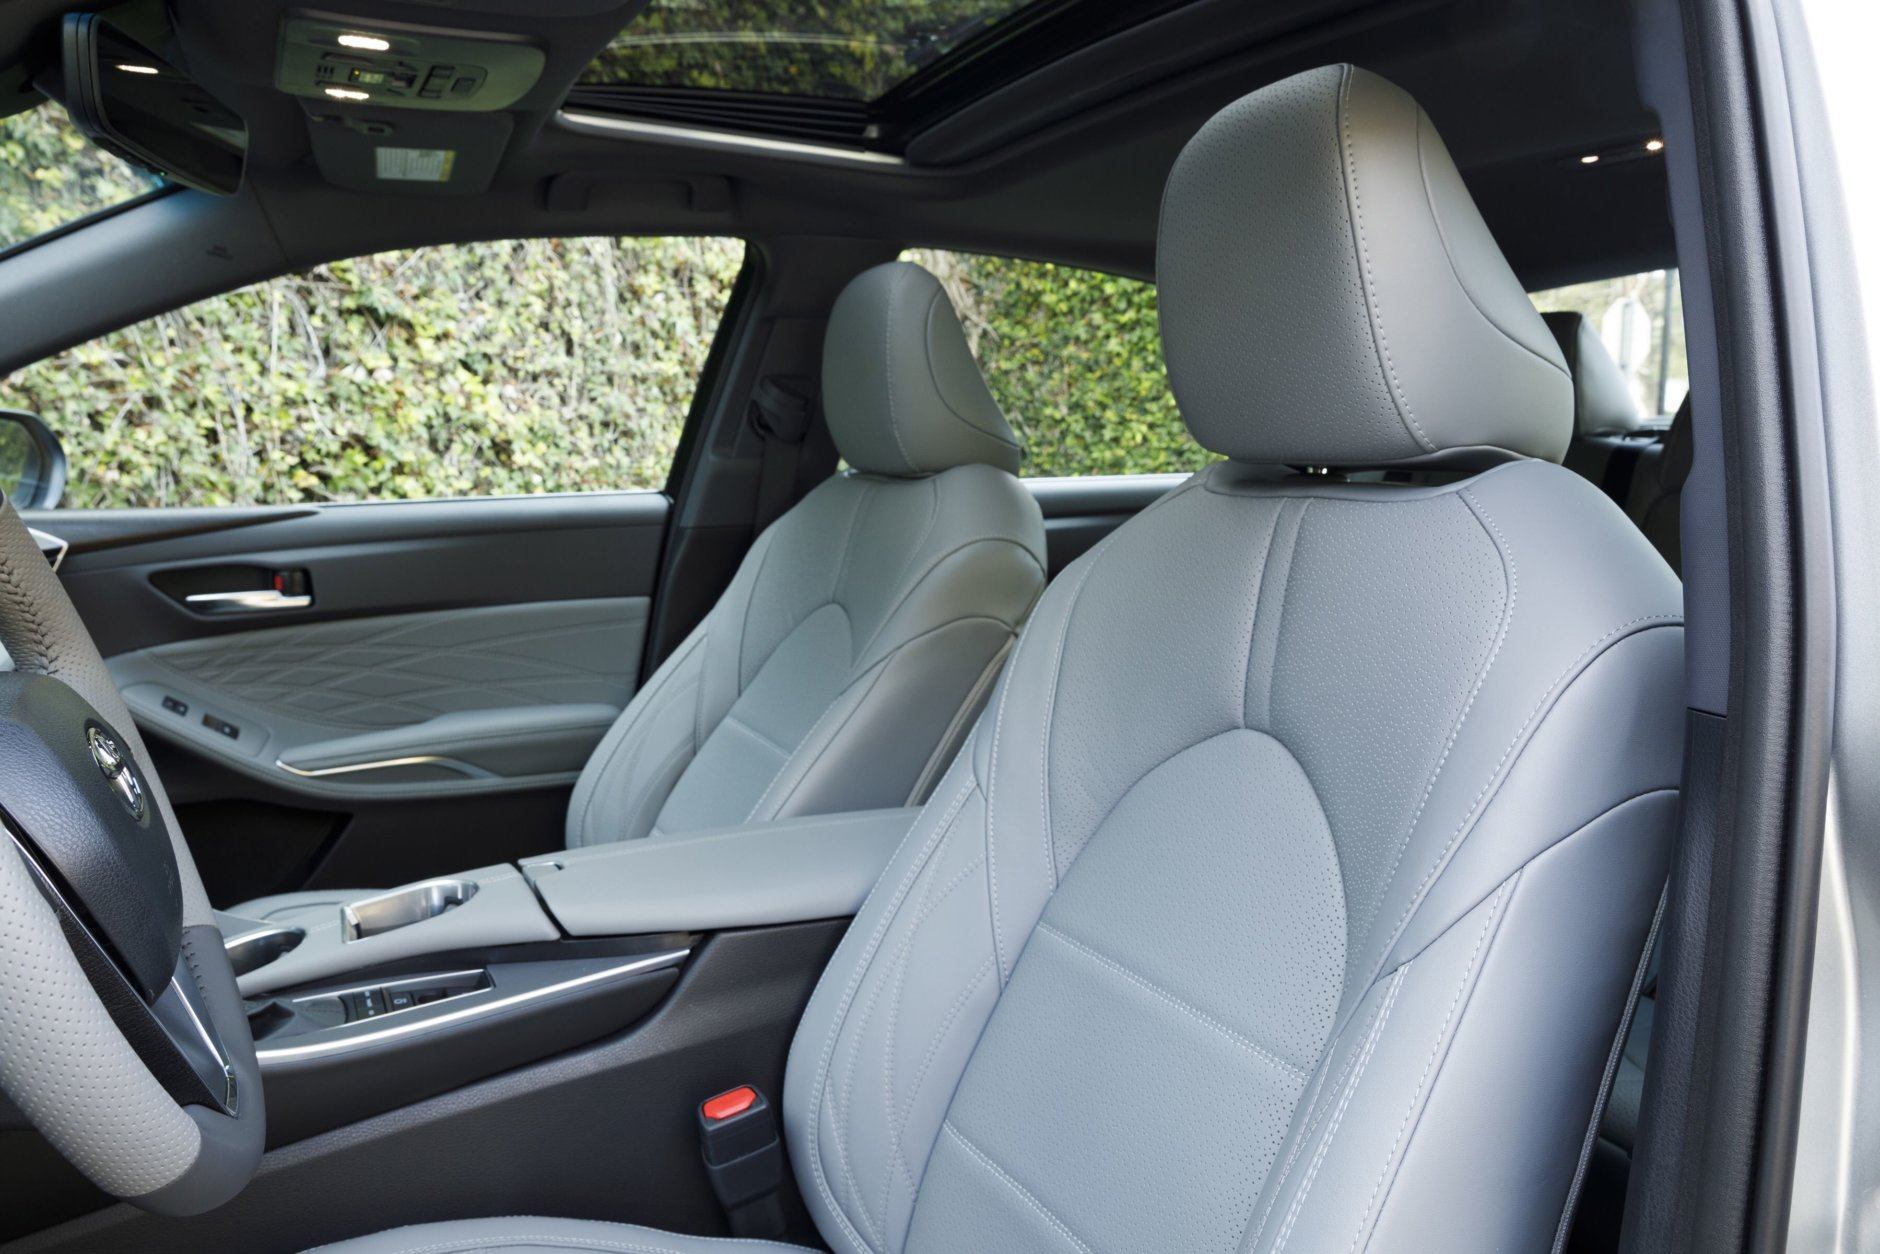 The Avalon Limited comes nicely equipped with leather, heated and ventilated seats that seem to be Lexus quality with a look and feel that’s a step up for the Avalon. (WTOP/Mike Parris) 